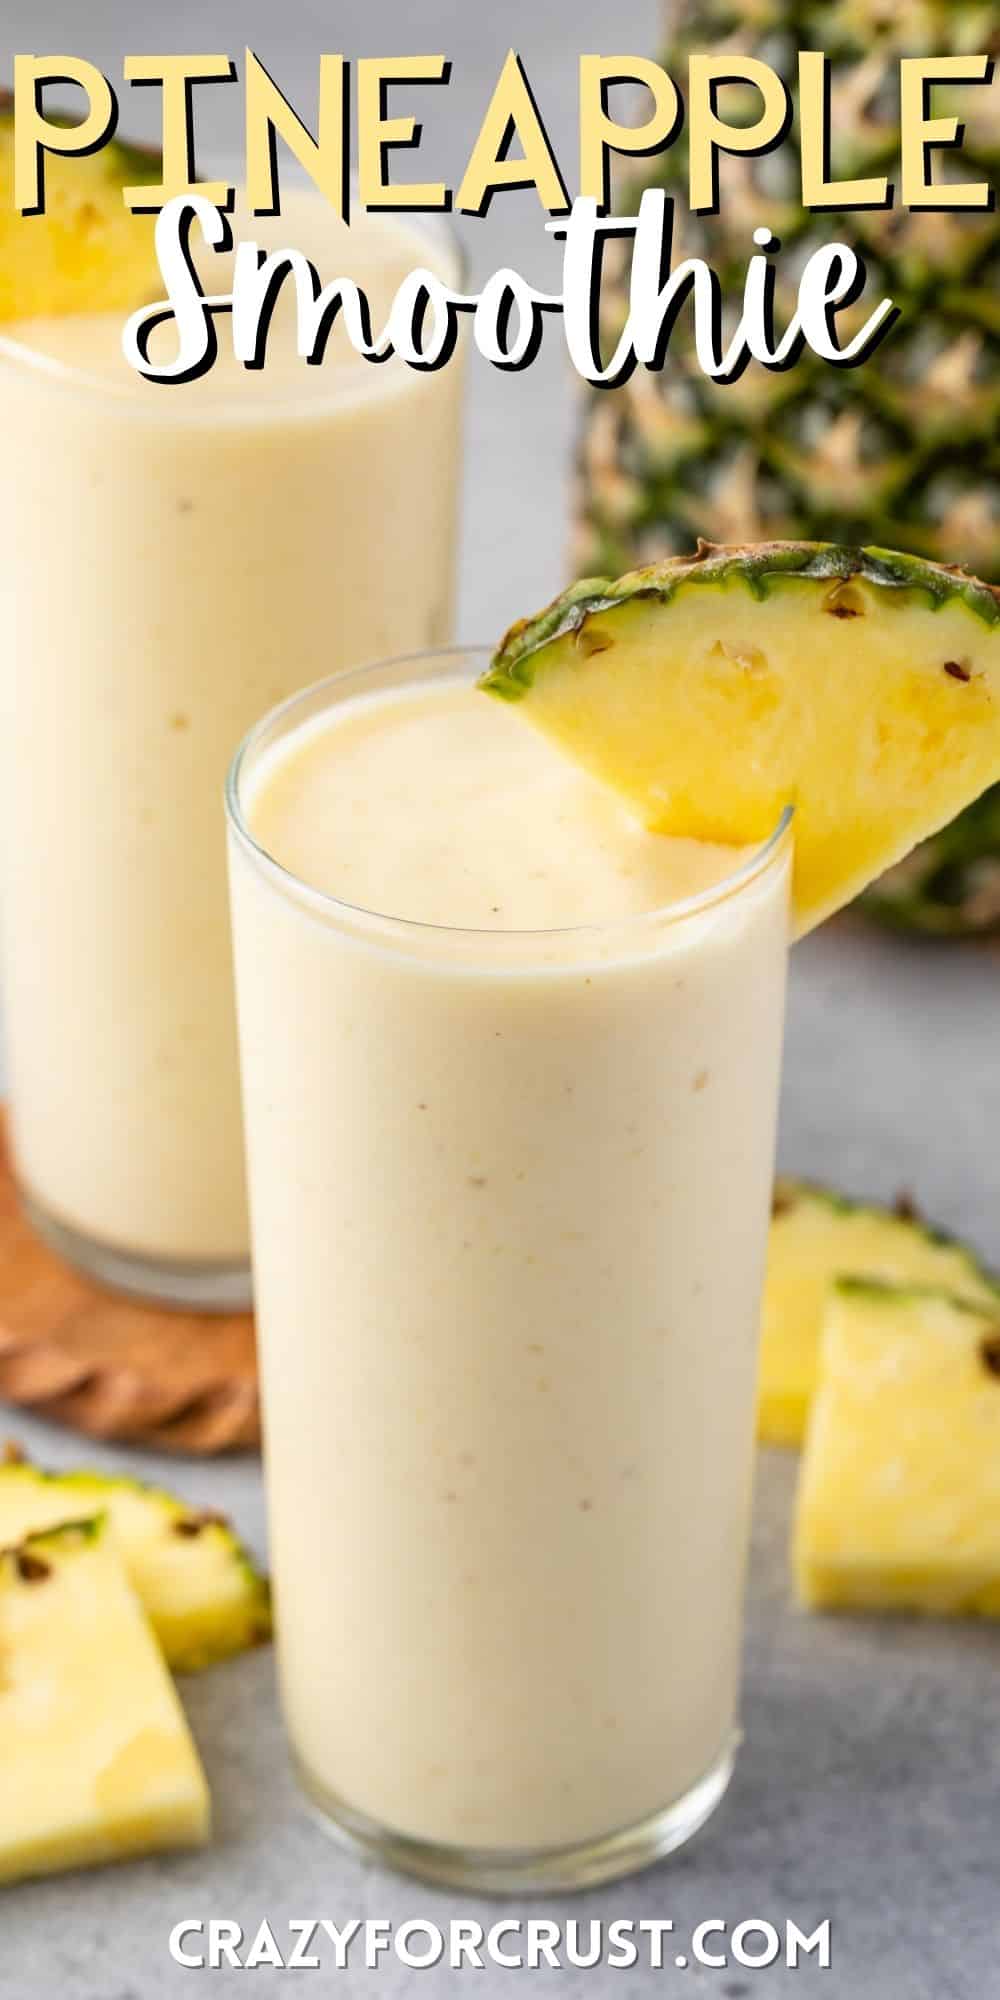 yellow pineapple smoothie in a tall clear glass with a pineapple slice on the rim with words on the image.